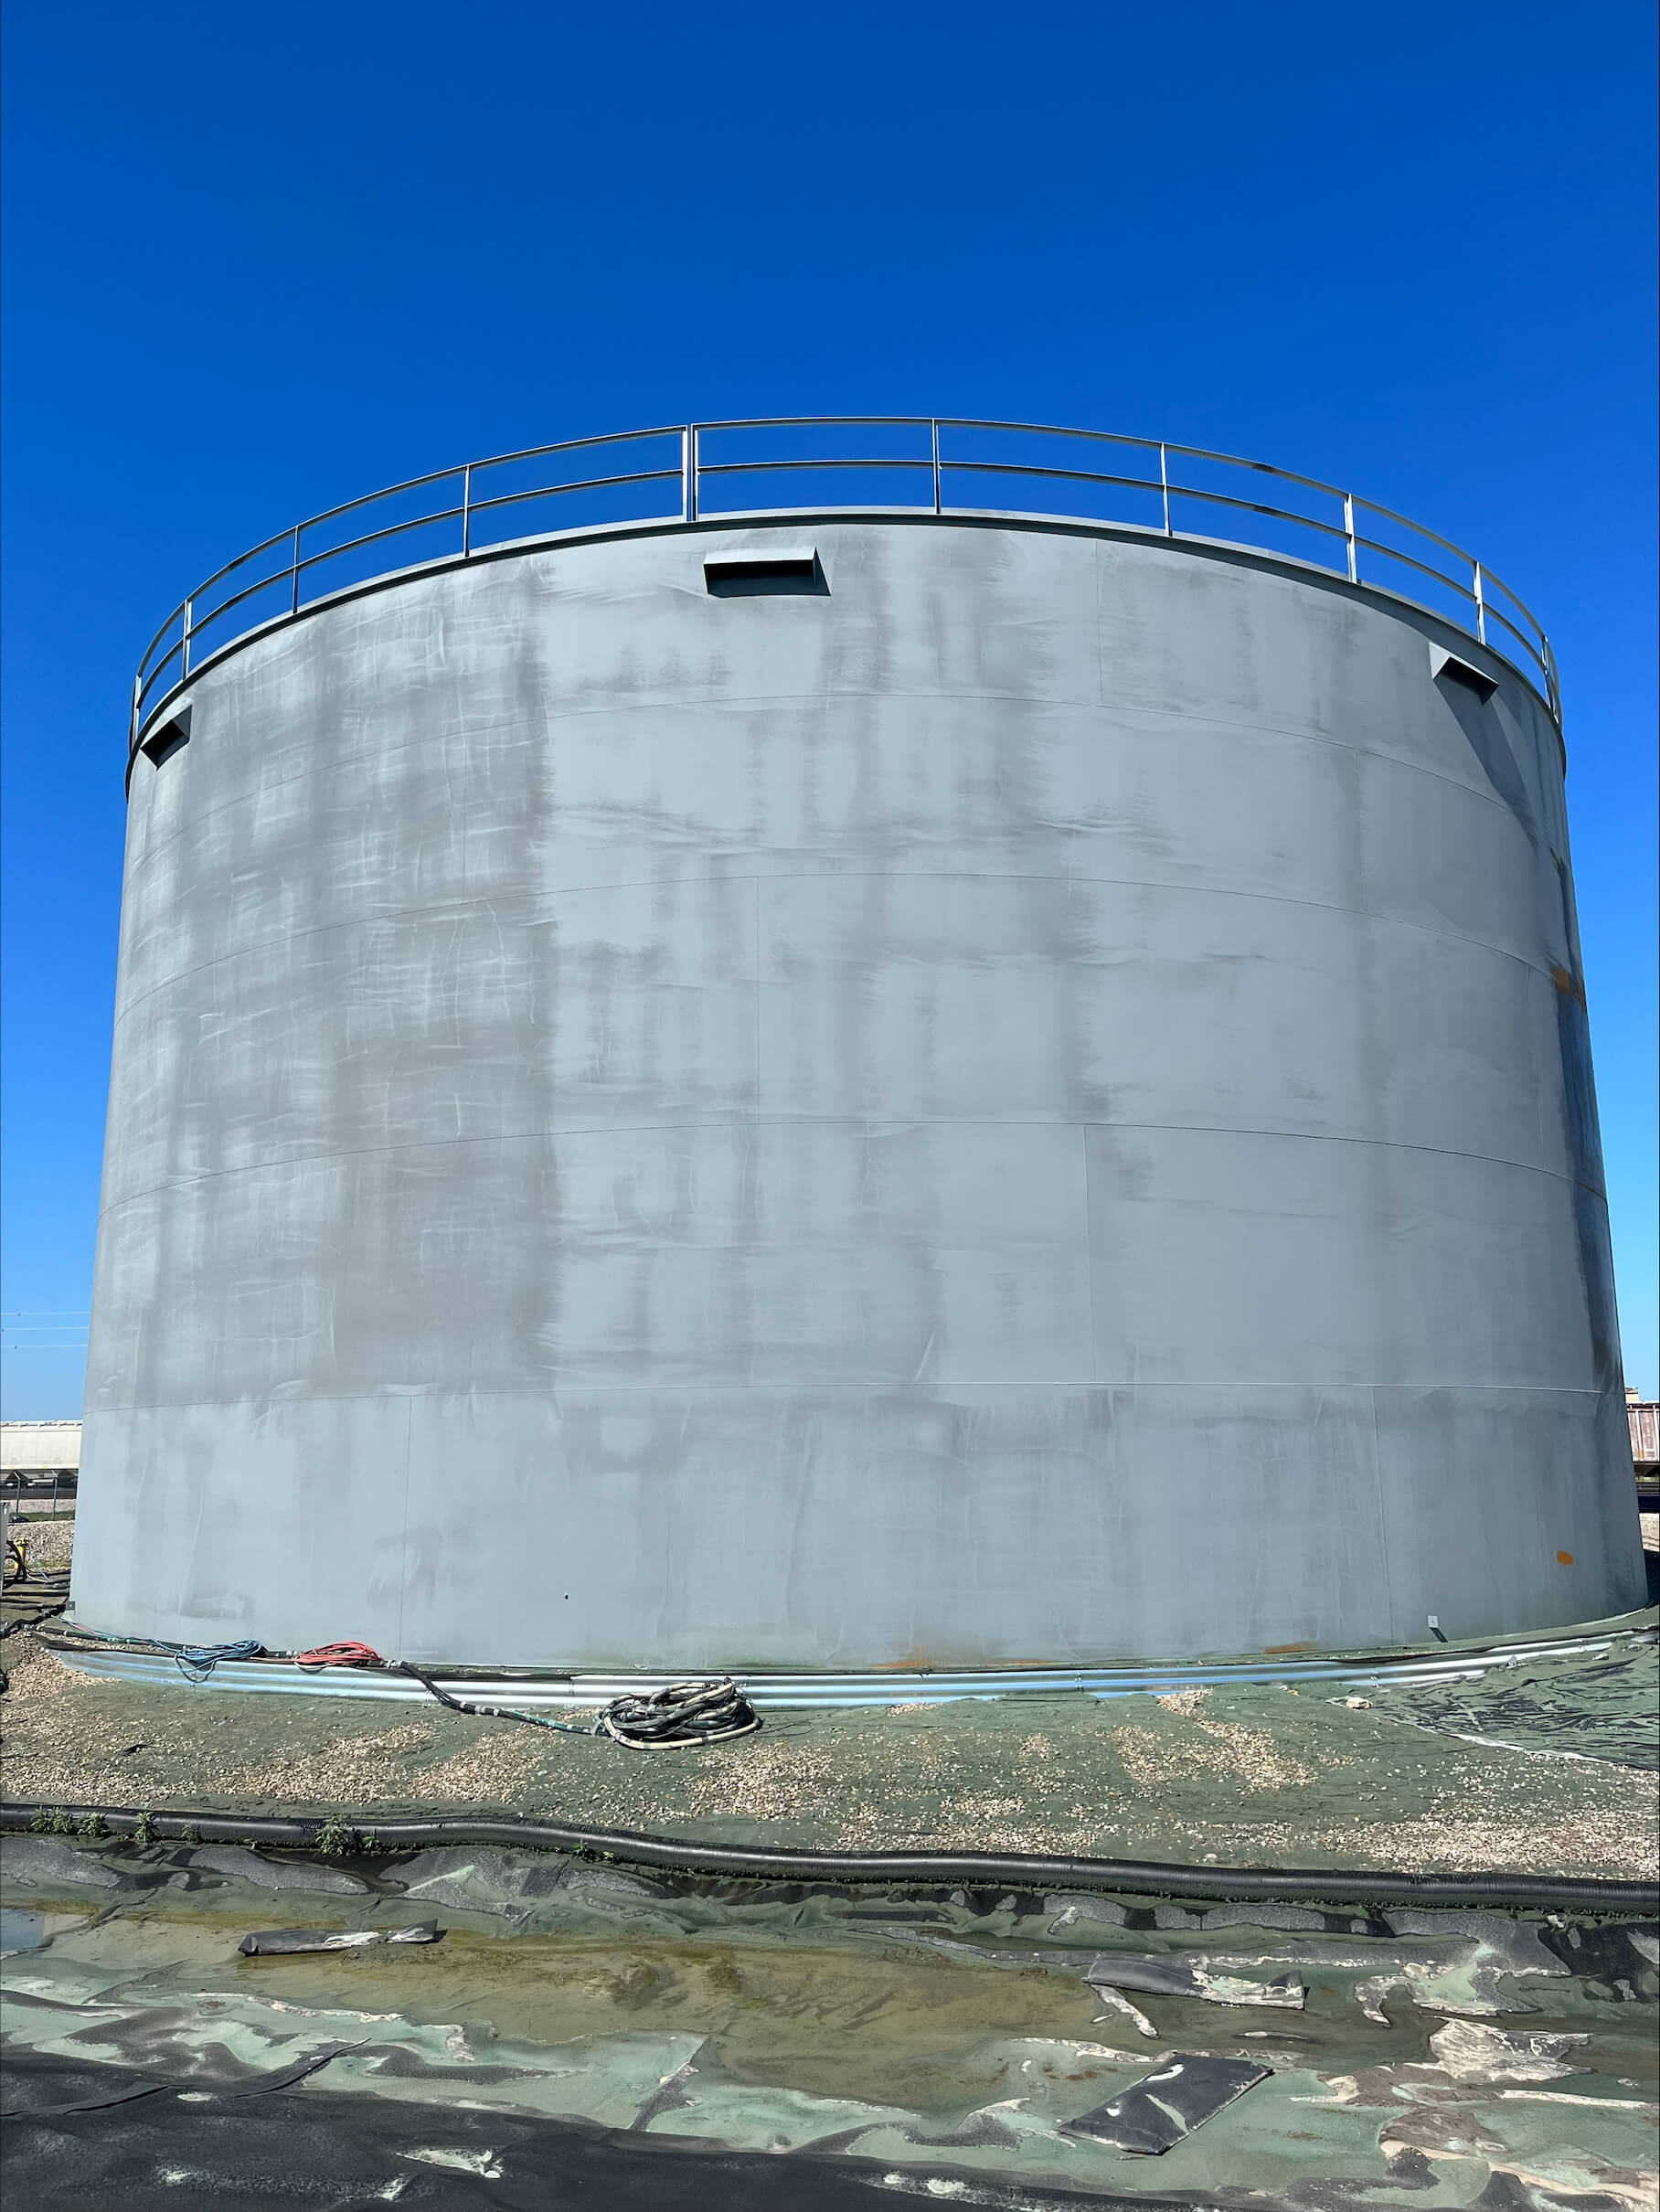 A newly constructed steel ethanol storage tank is seen following surface preparation via abrasive blasting.